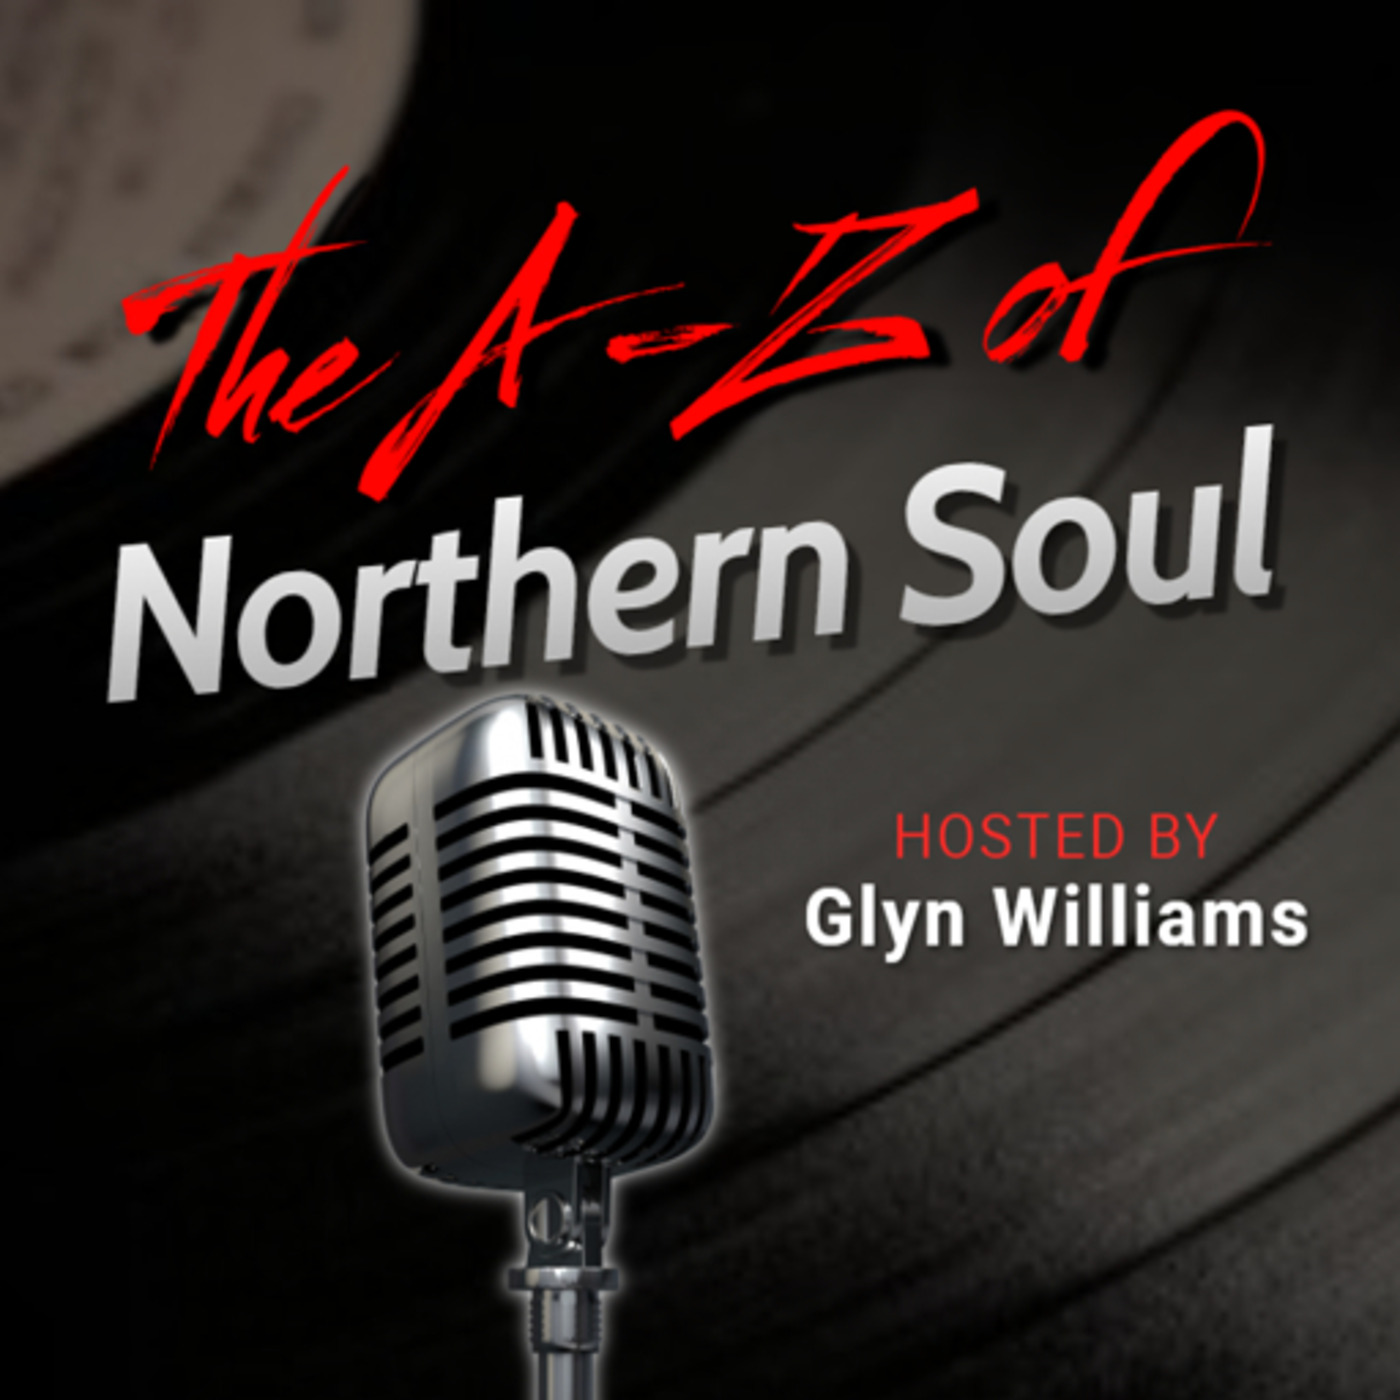 The A-Z of Northern Soul E054